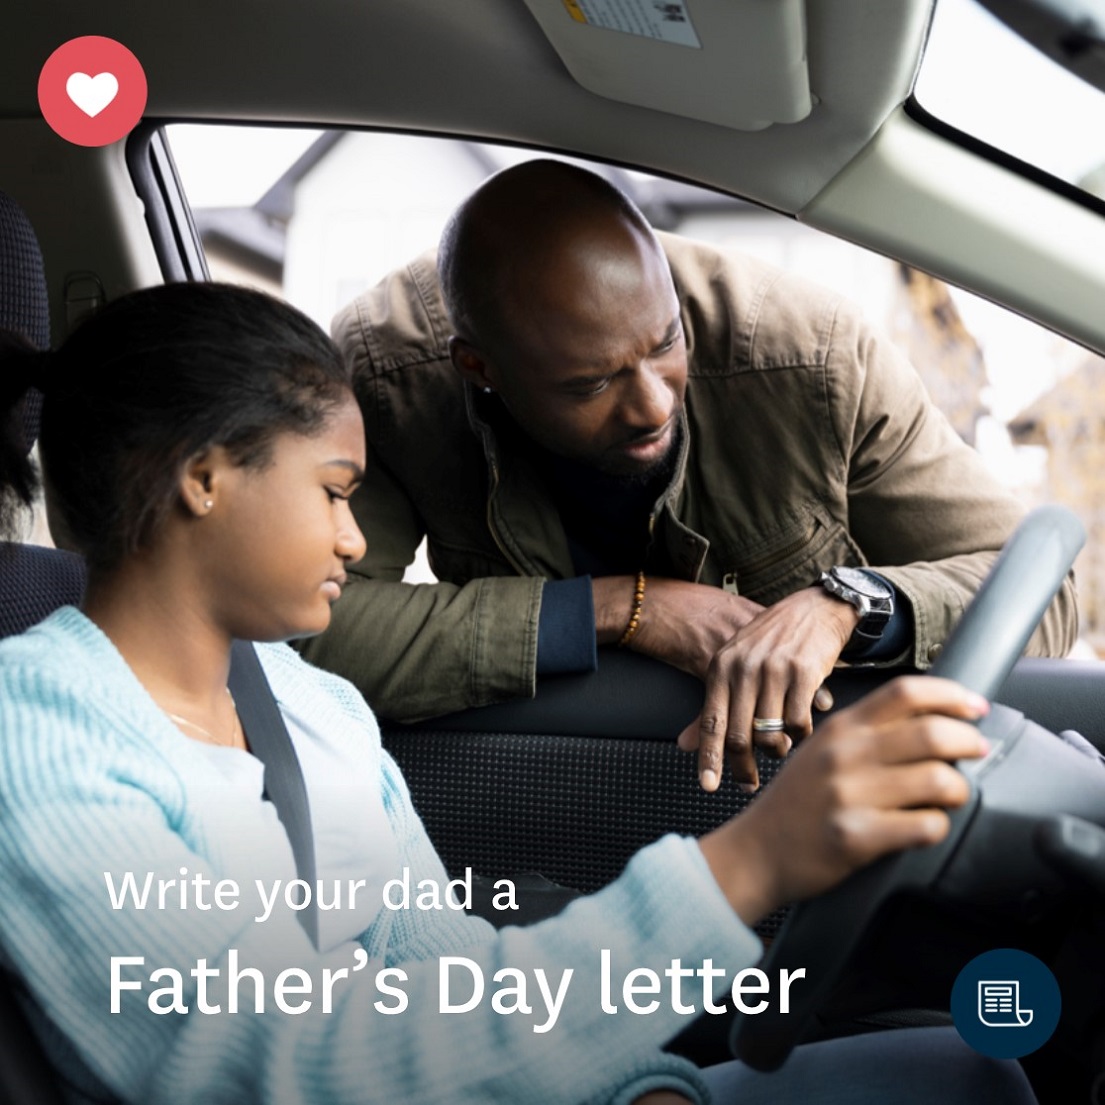 Write your Dad a Father's Day Letter